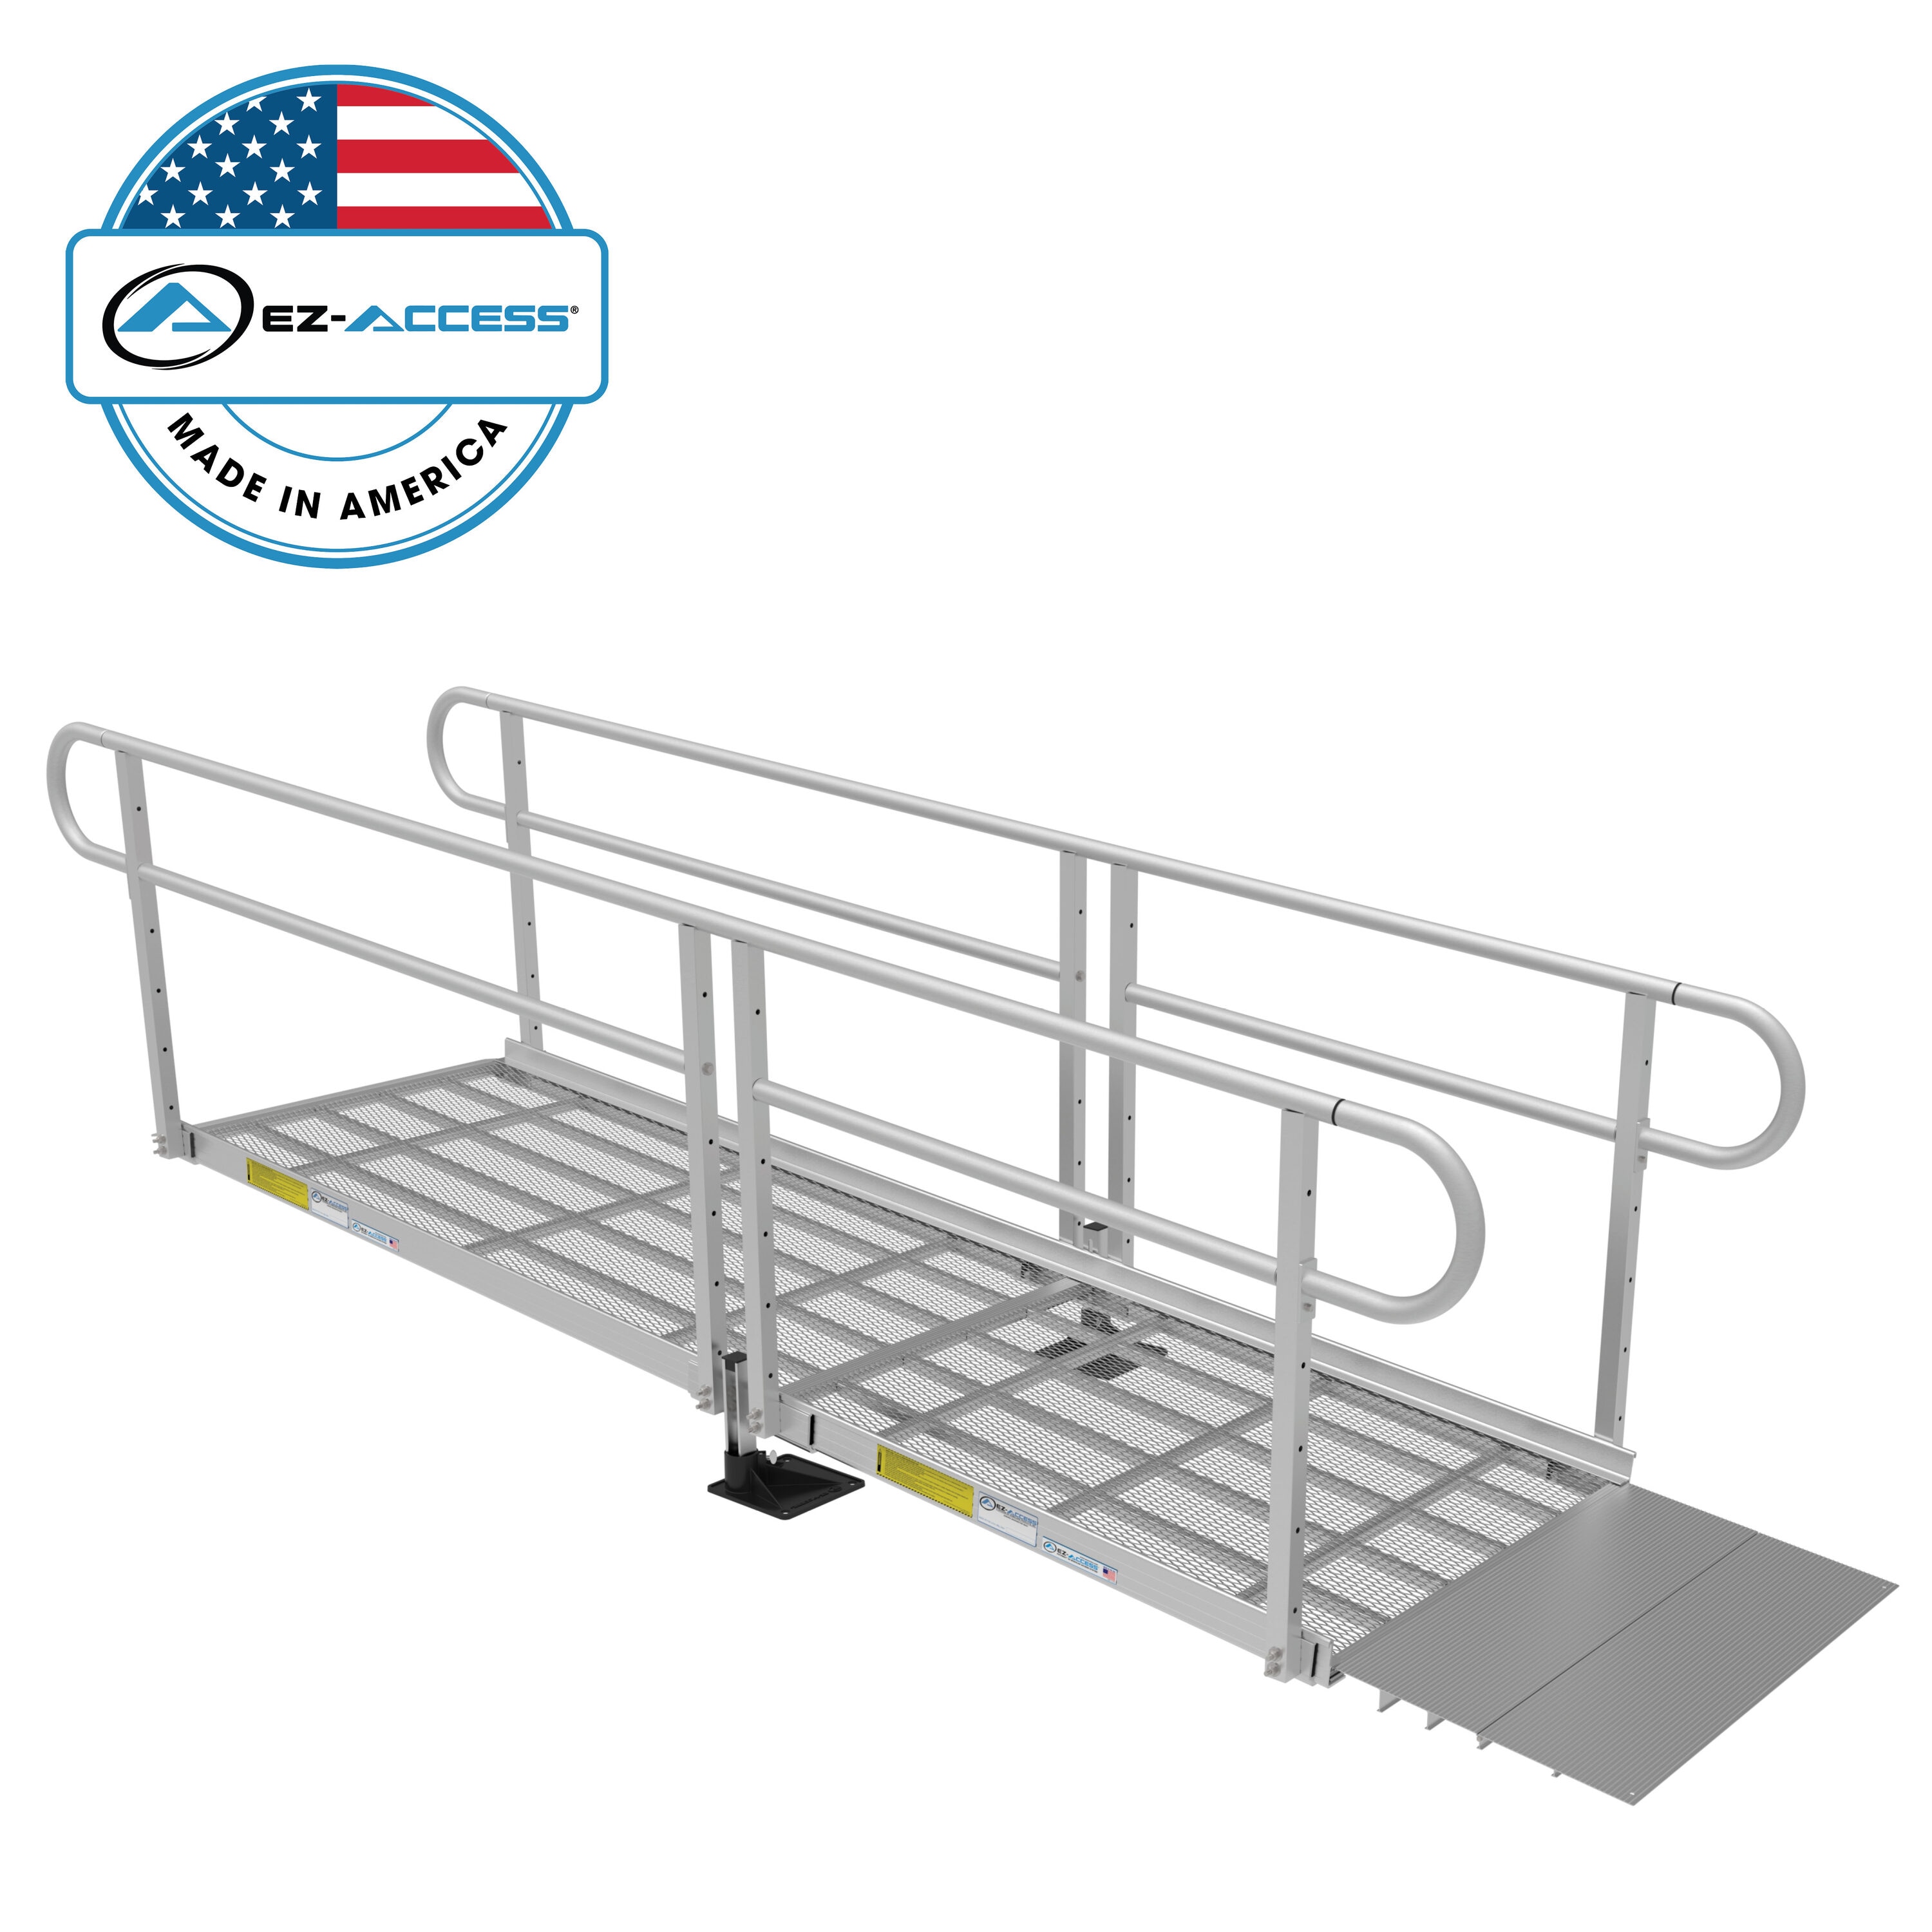 10 Foot Long Entryway Wheelchair Ramps at Lowes.com